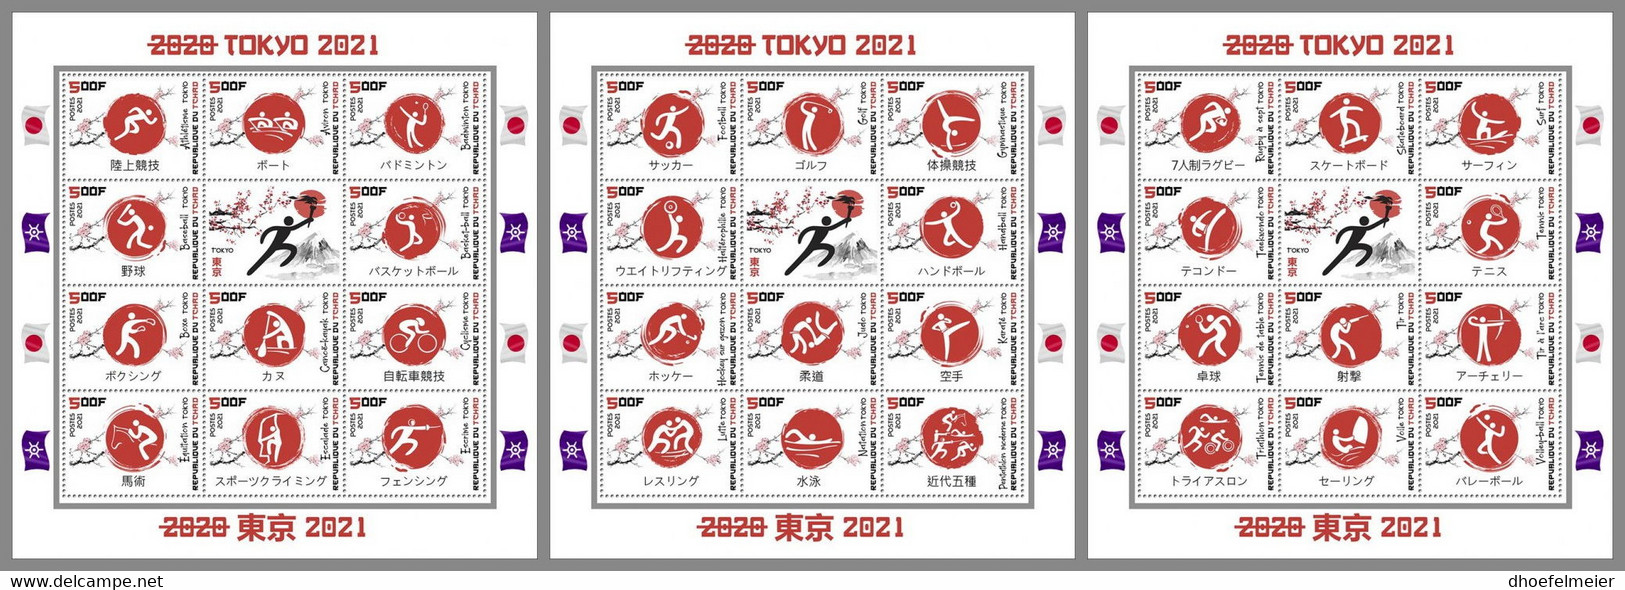 CHAD 2021 MNH Tokyo Summer Games 2021 Olympische Sommerspiele 3M/S - IMPERFORATED - DHQ2214 - Sommer 2020: Tokio